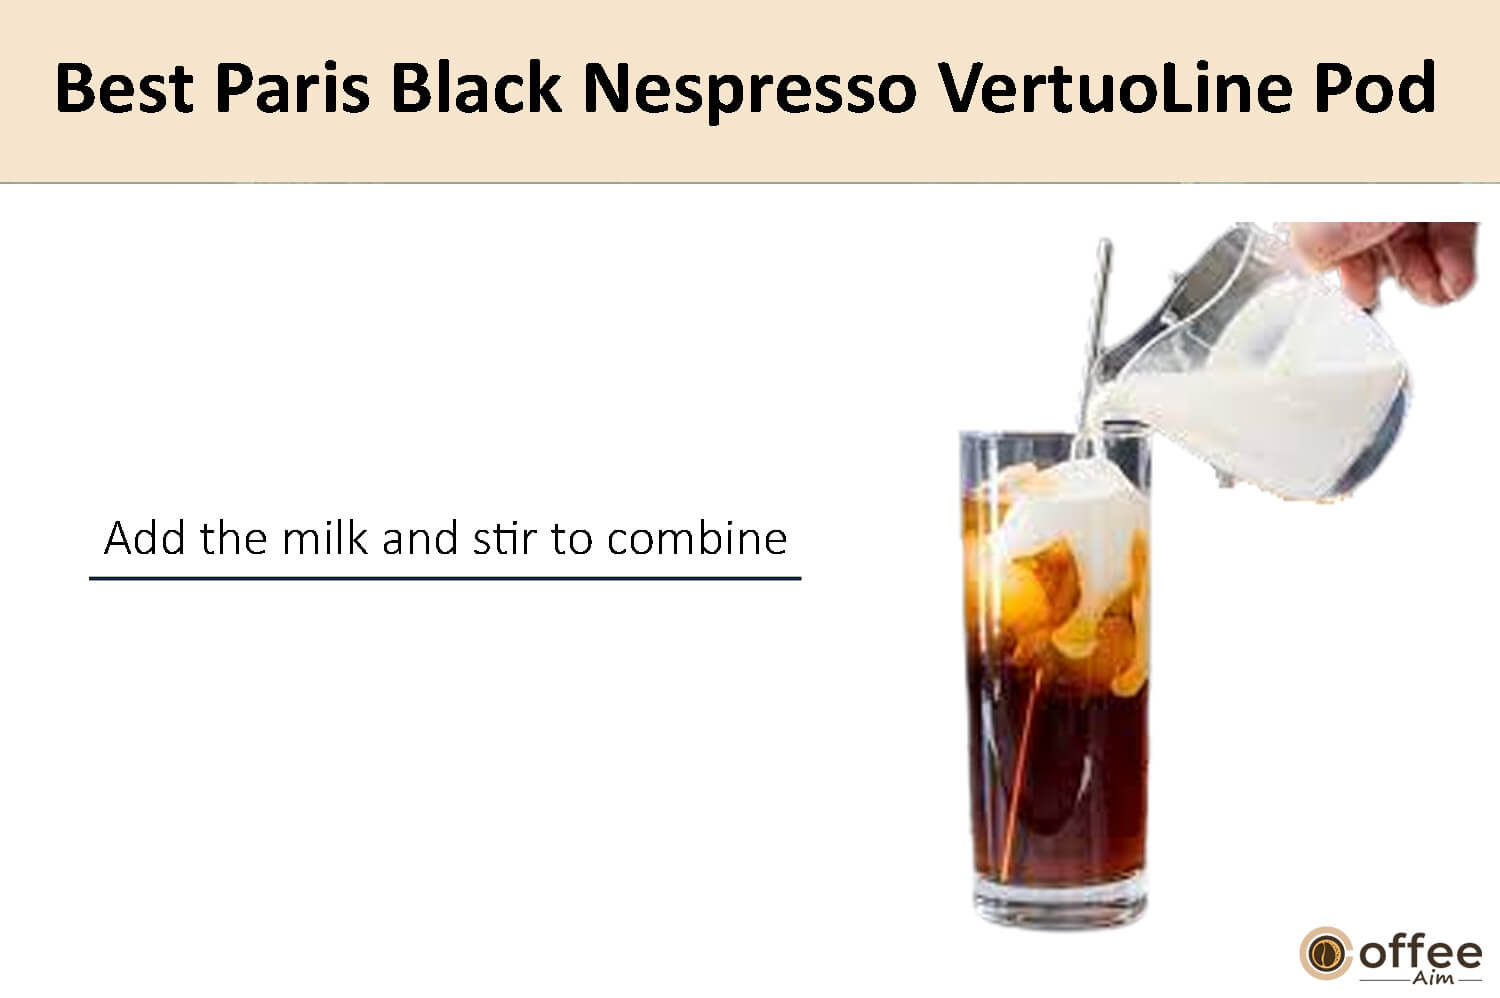 In this image, I elucidate the preparation instructions for crafting the finest Nespresso Paris Black Vertuo coffee pod.